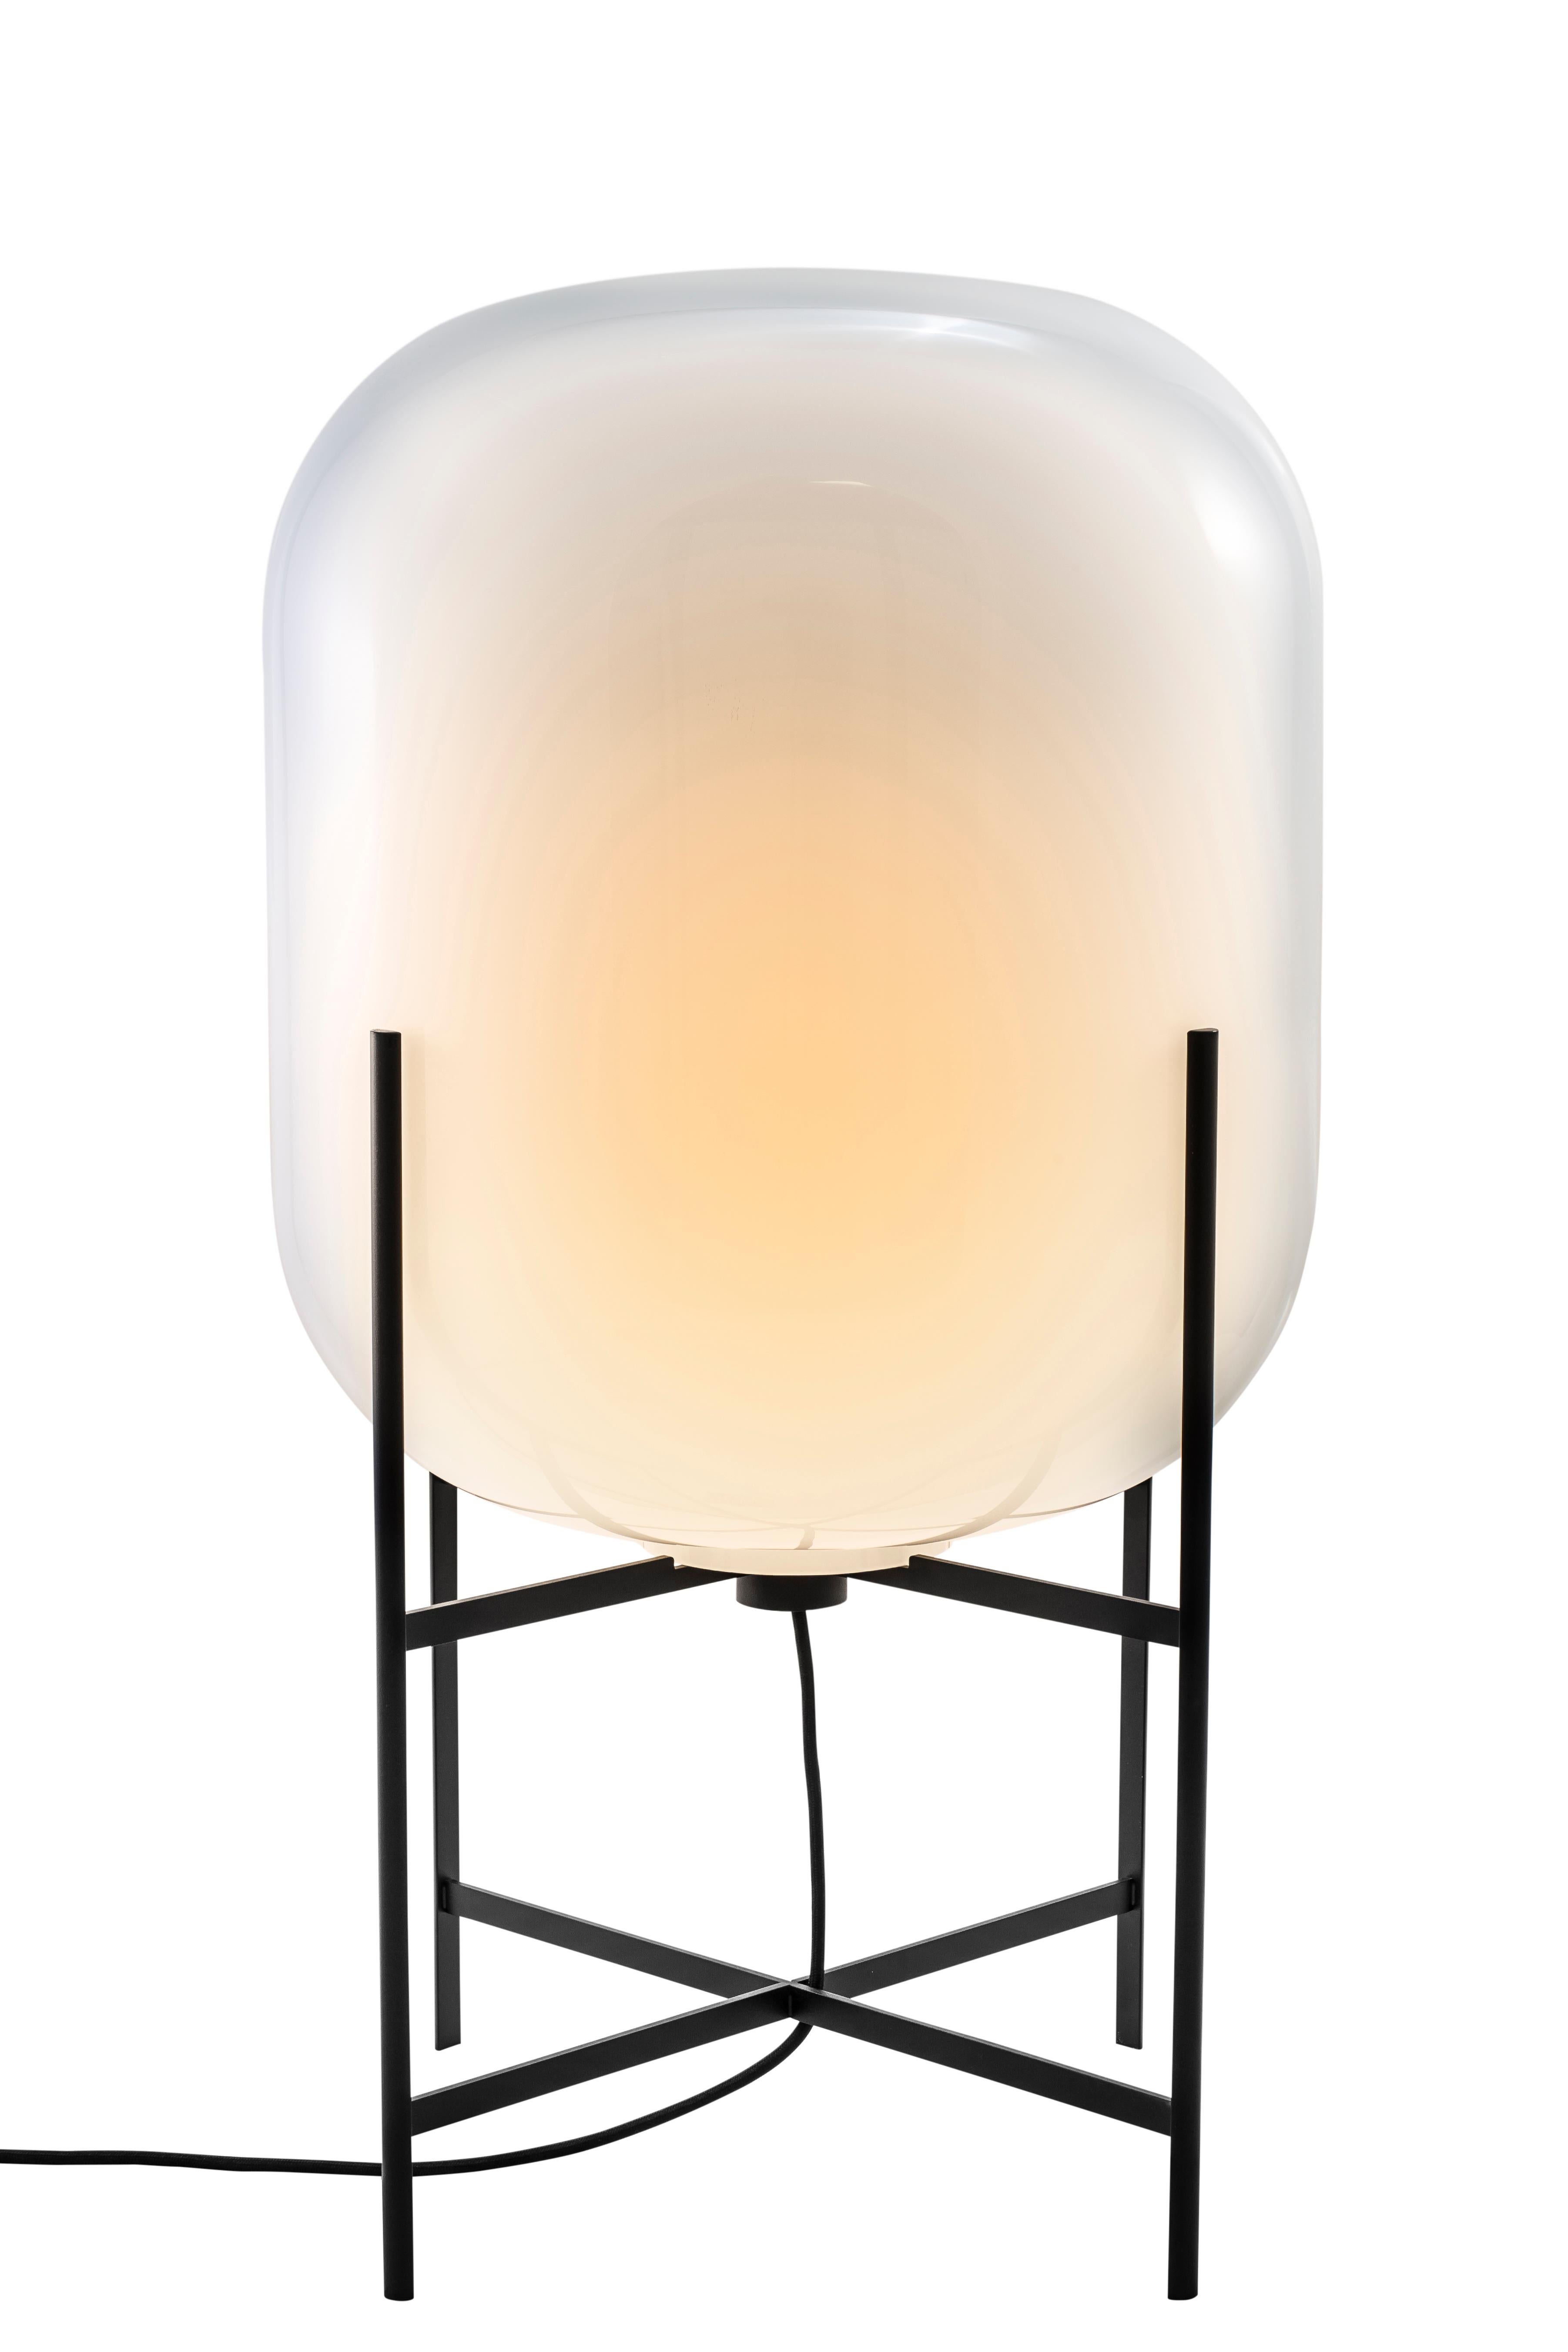 Oda medium white black floor lamp by Pulpo.
Dimensions: D45 x H80 cm.
Materials: handblown glass coloured and steel.

Also available in different finishes. 

A slender base hugs a bulbous form. An industrial motif softened by the gentle curves